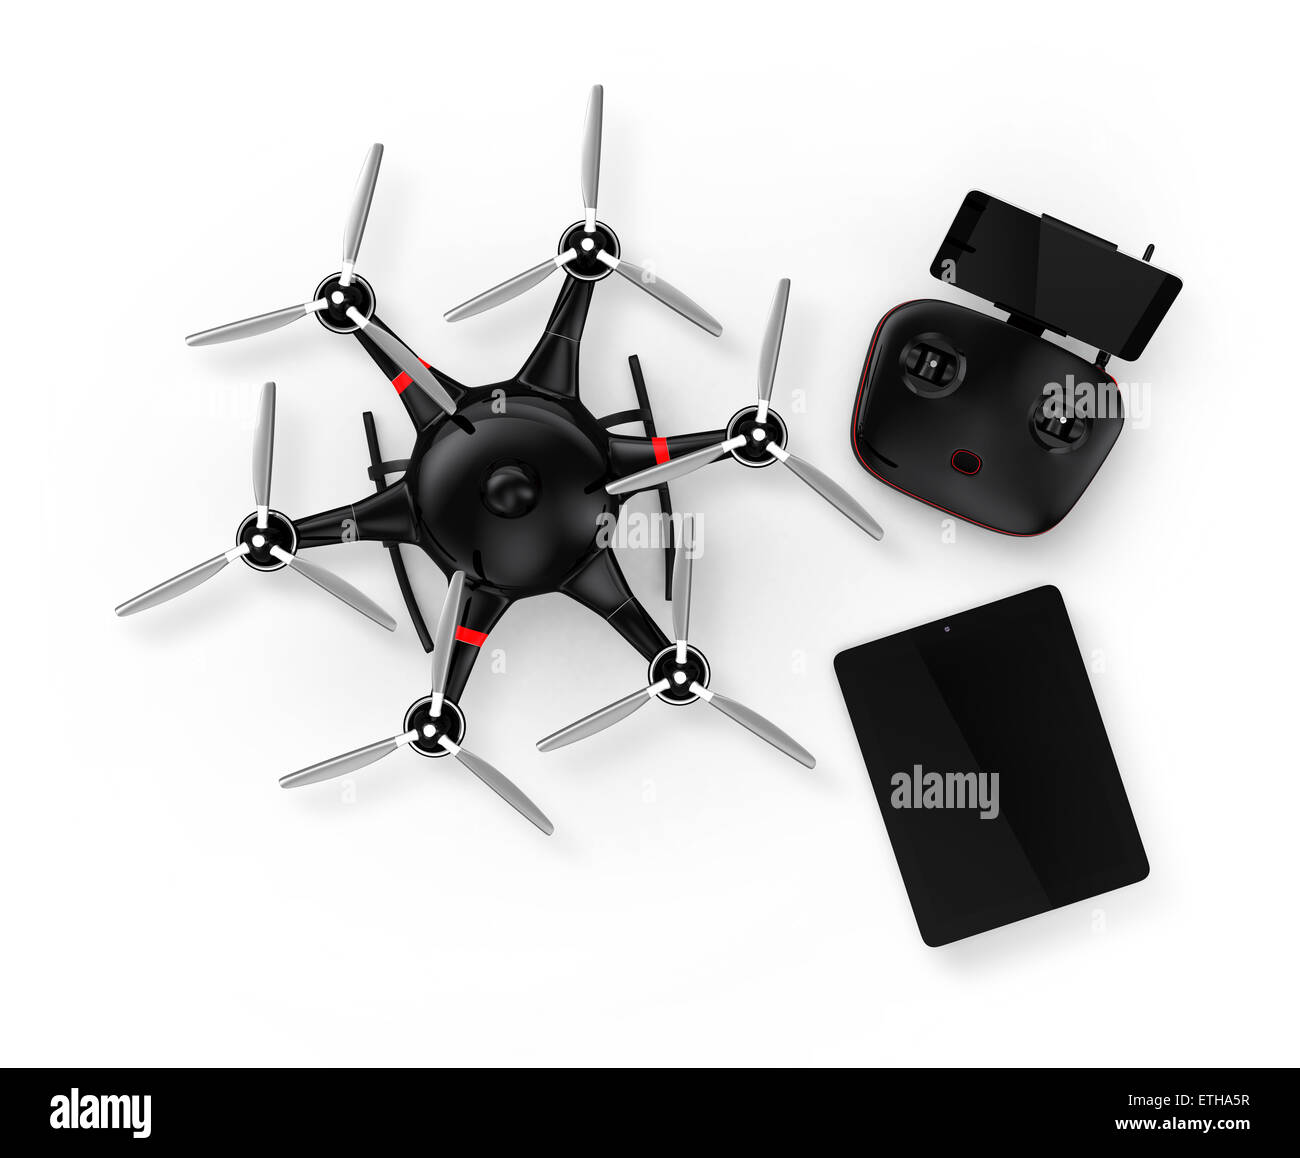 Top view of black hexacopter with remote controller and tablet PC. Stock Photo